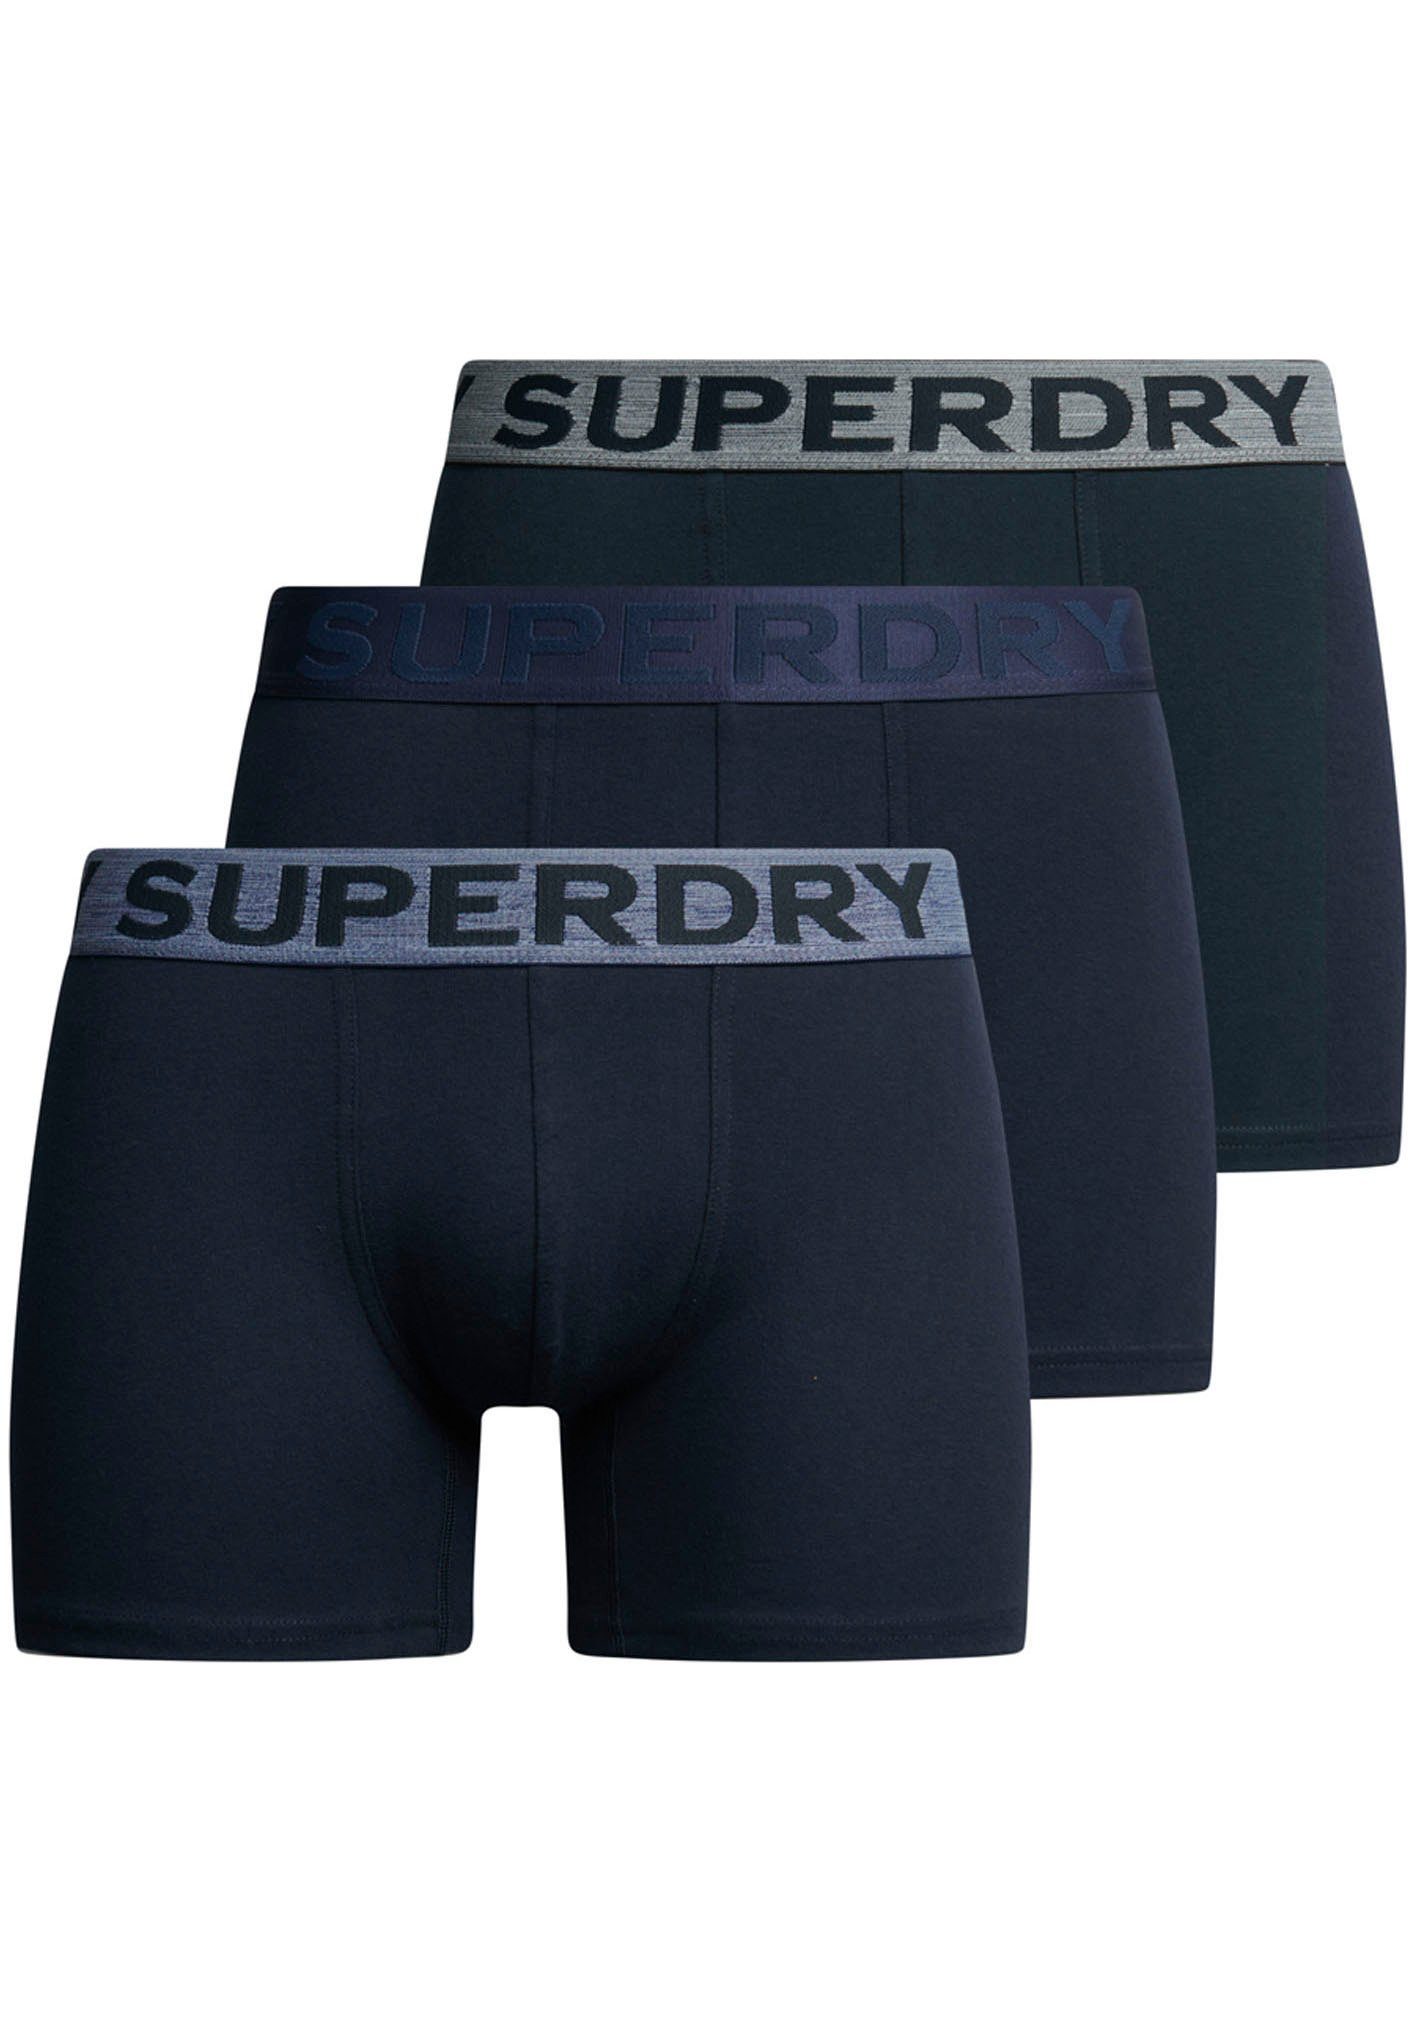 BOXER 3-St) TRIPLE Navy PACK Superdry Boxershorts (Packung, Eclipse